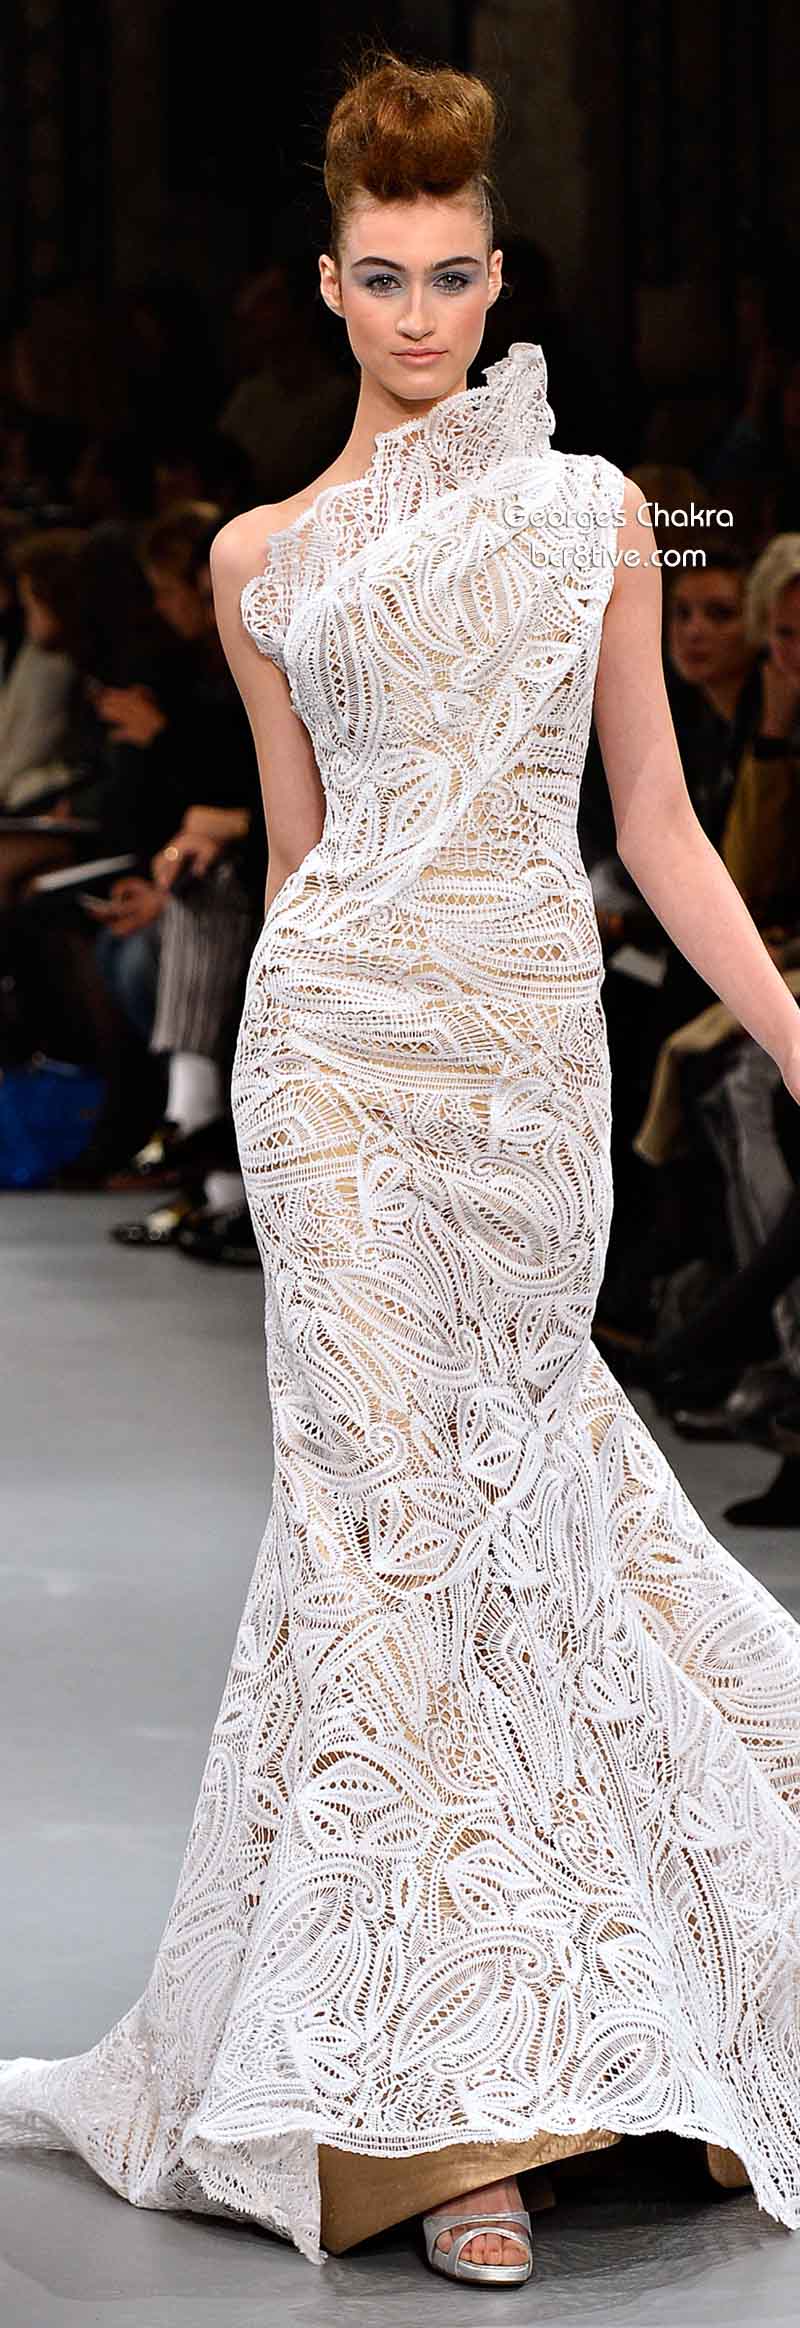 Georges Chakra Spring 2014 Couture